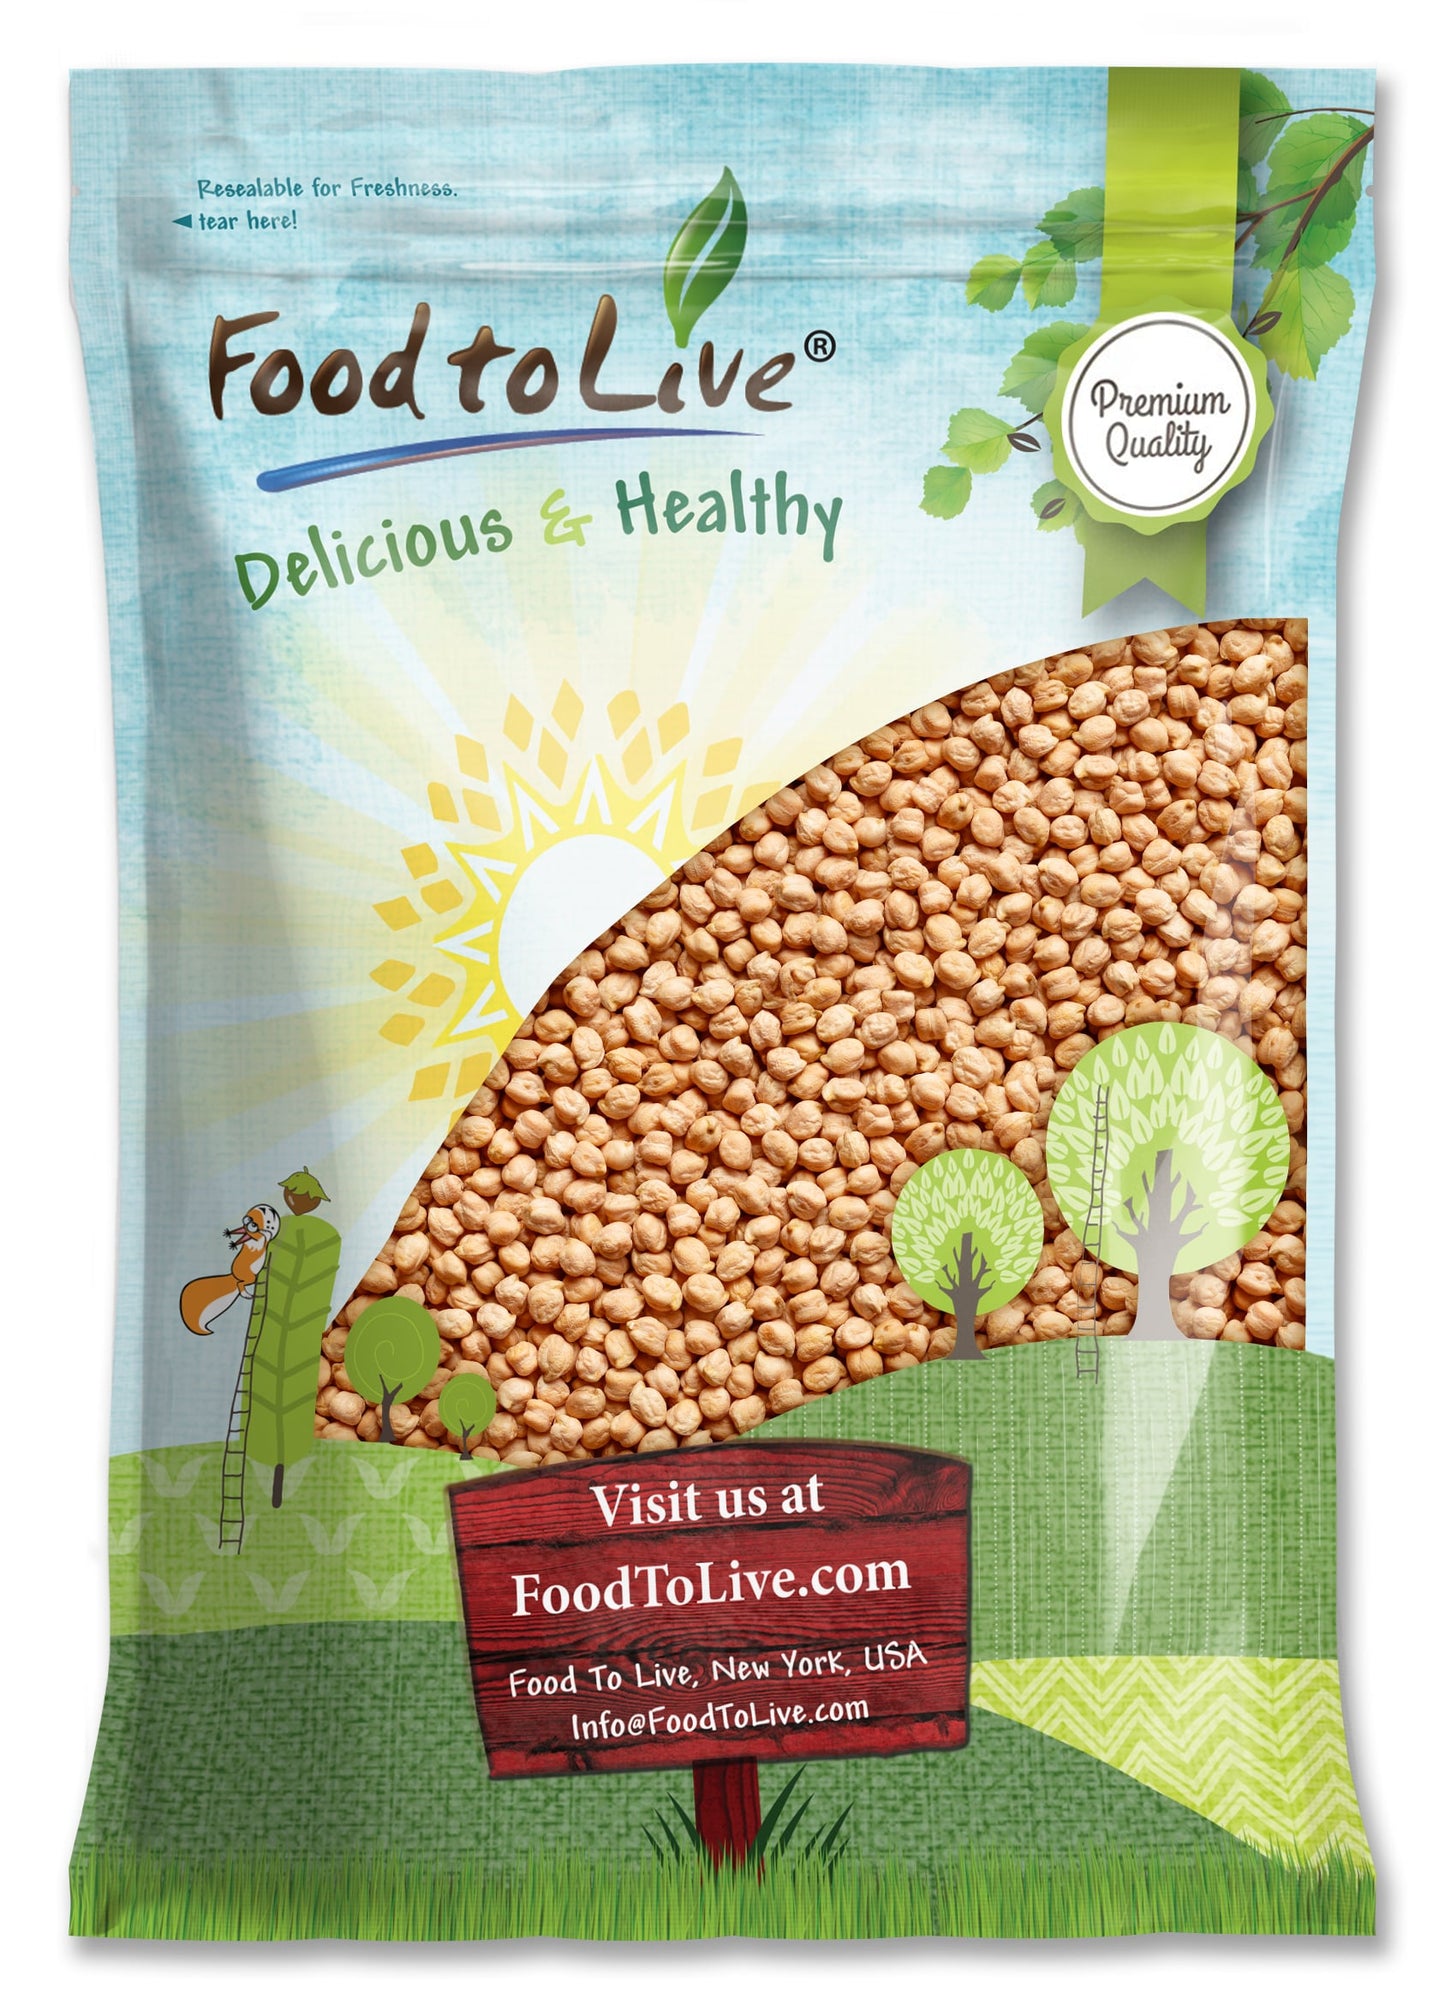 Garbanzo Beans — Whole Dried Raw Chickpeas, Kosher, Vegan, Bulk, Sproutable, Low Sodium. Great for Hummus, Salads, Stews - by Food to Live